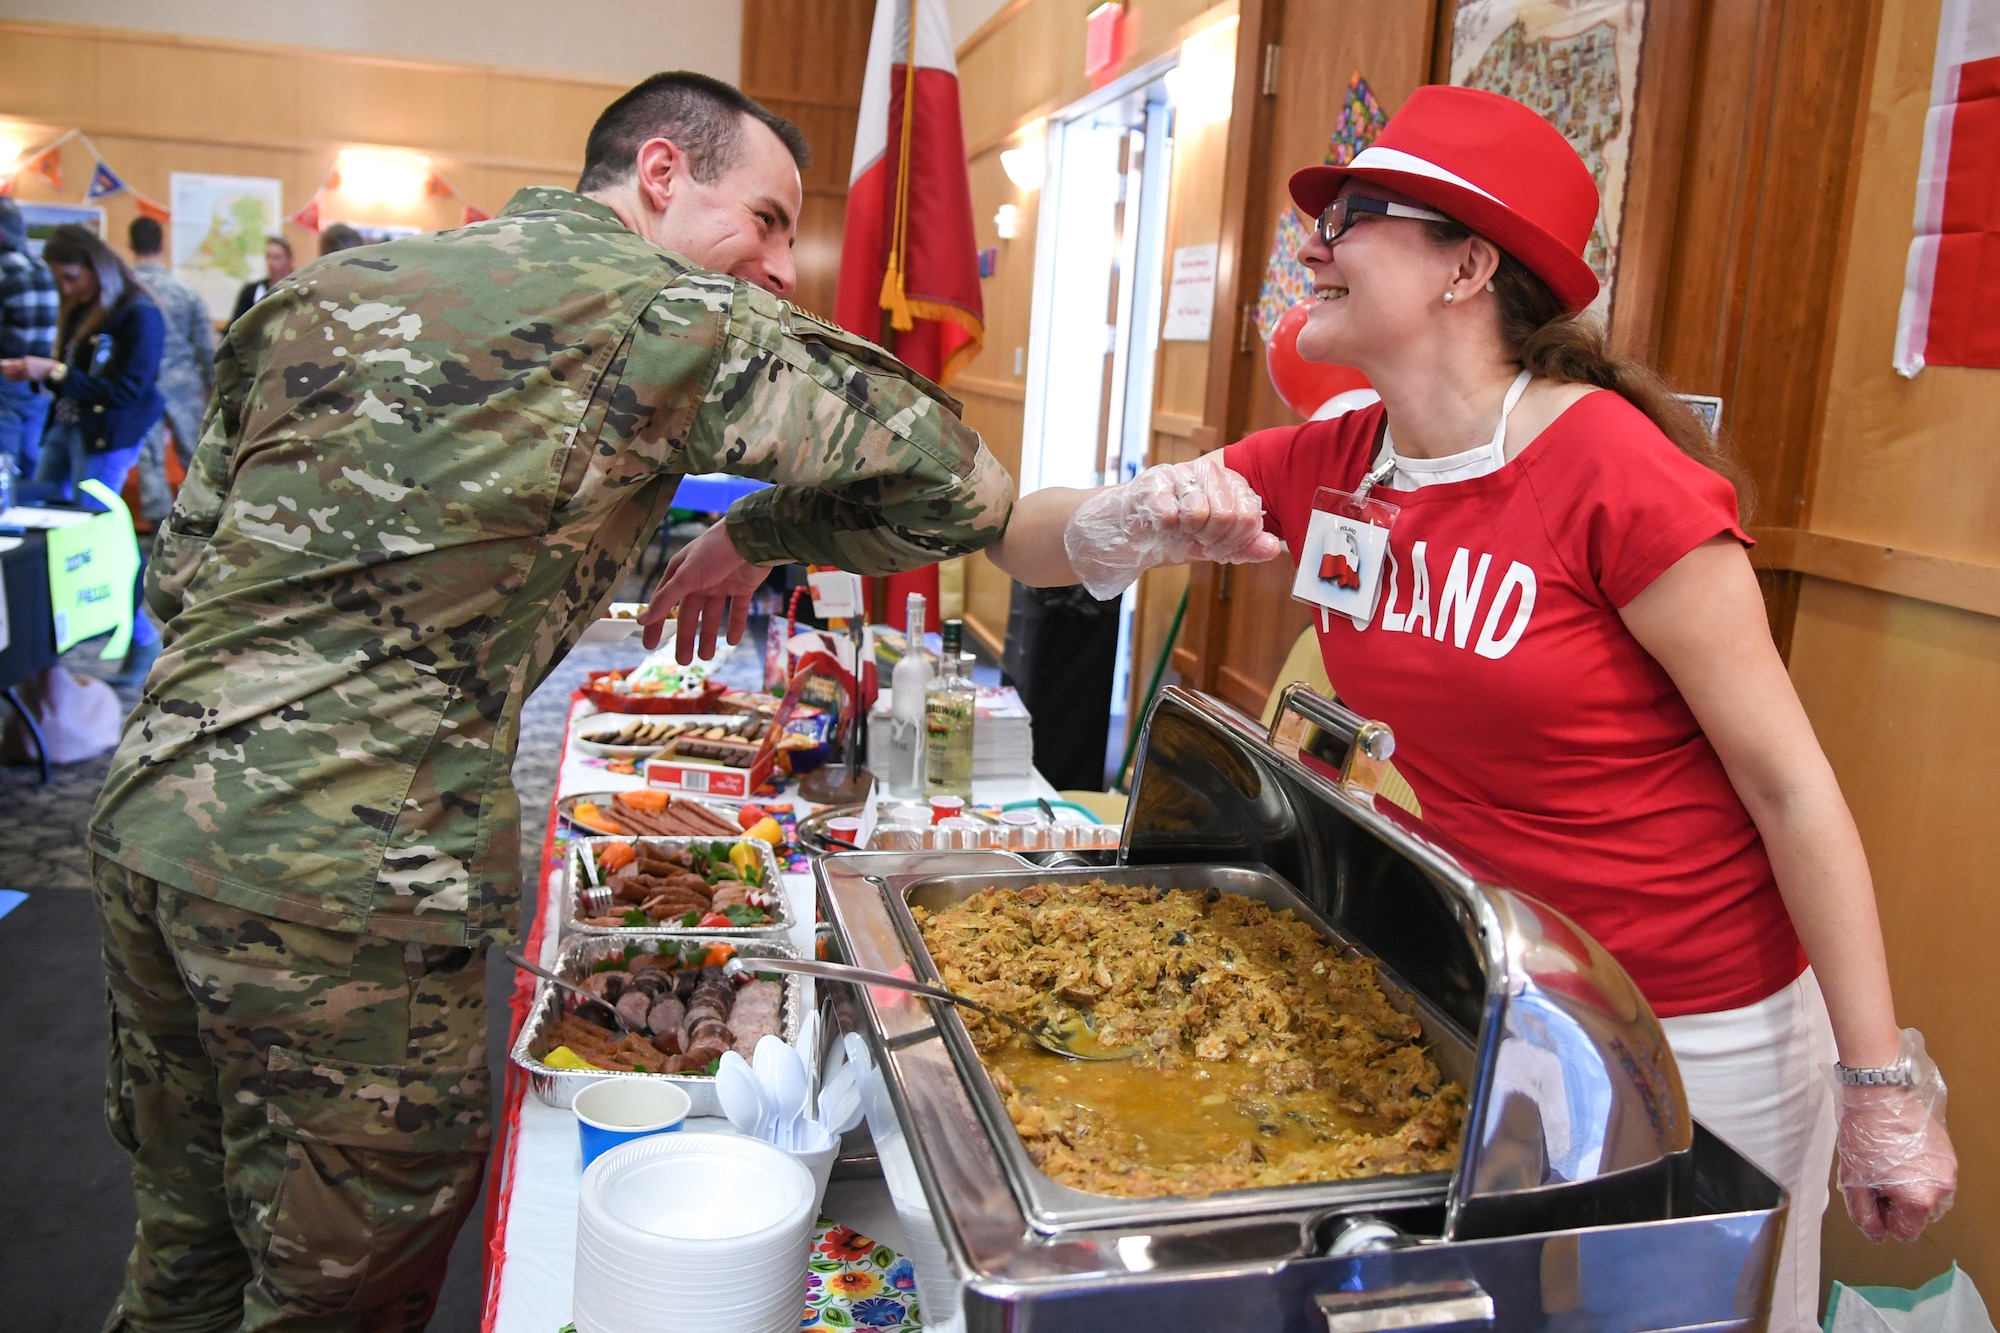 First Lt. Jamee Boyer, Air Force Life Cycle Management, elbow bumps AÍicia Pogovzelska, from Poland, after tasting her dish at the International Culinary Tasting Buffet March 4, 2020, at Hill Air Force Base, Utah. The event was hosted by the Hill AFB foreign liaison officers and featured food, drinks, and cultural education from 15 different countries. (U.S. Air Force photo by Cynthia Griggs)